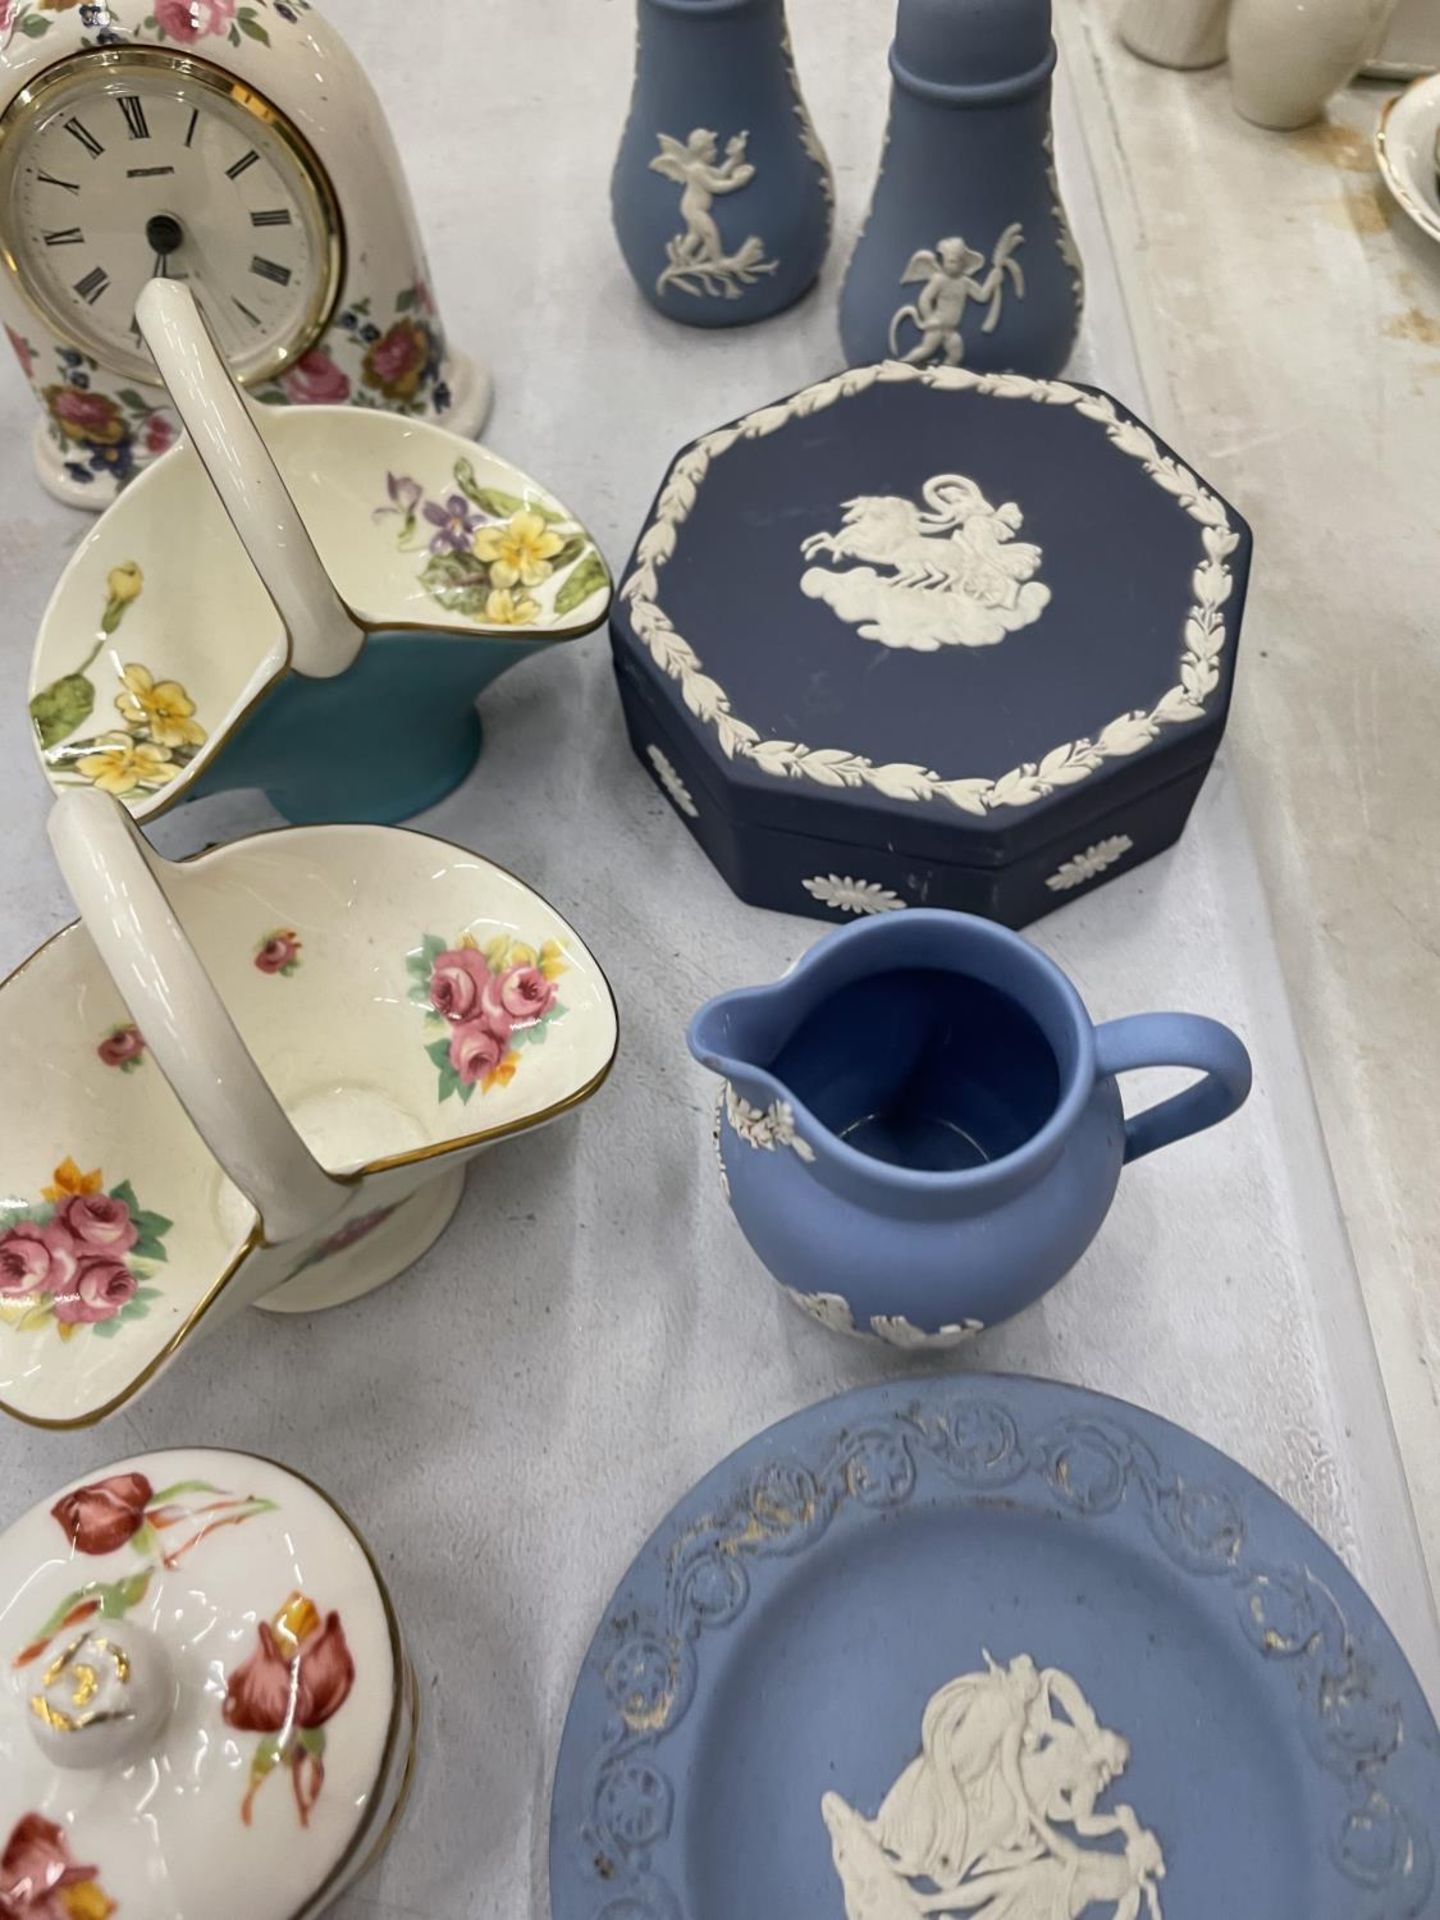 FIVE PIECES OF WEDGWOOD JASPERWARE, ROYAL DOULTON BASKETS, ETC - Image 3 of 5